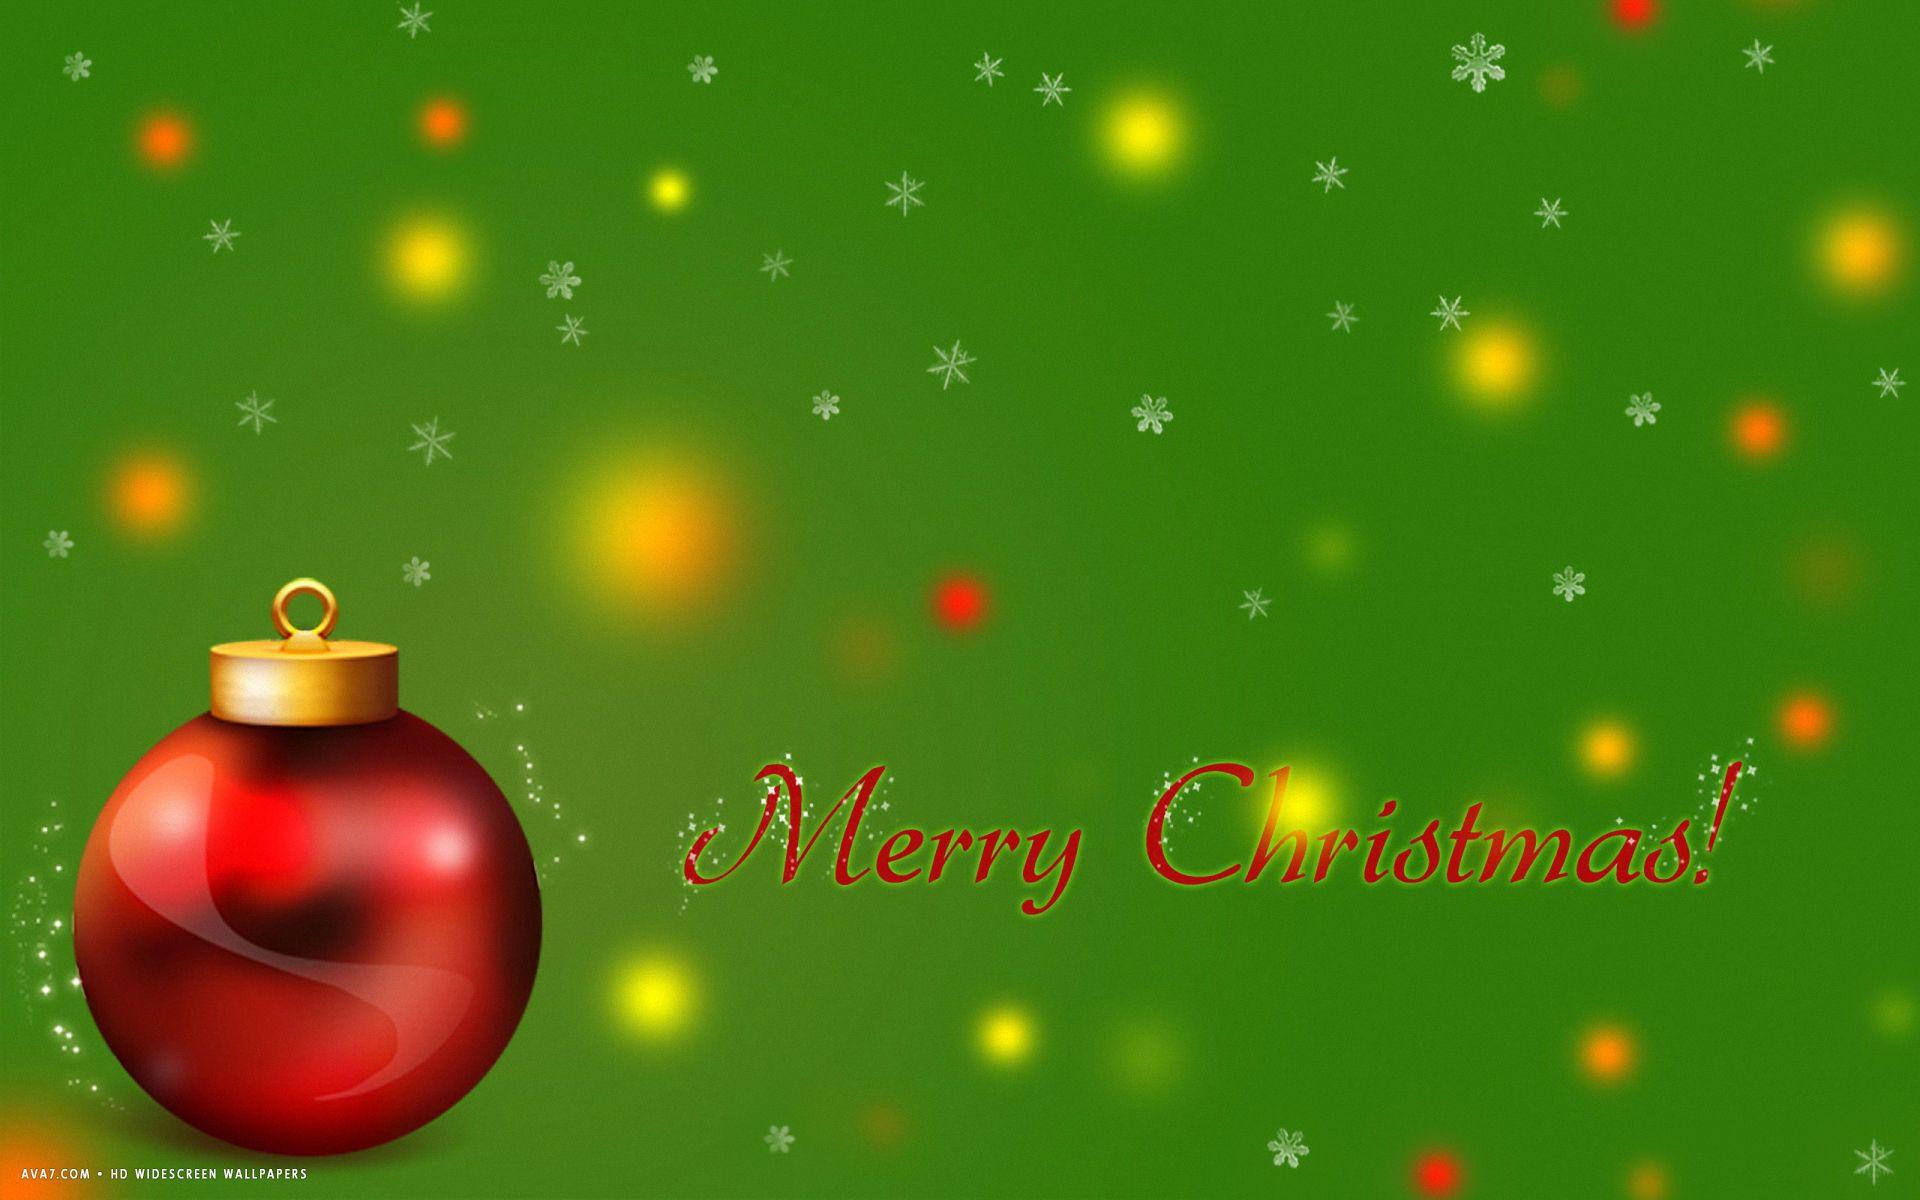 merry christmas red tree ball stars snowflakes green holiday HD widescreen wallpaper / holidays background